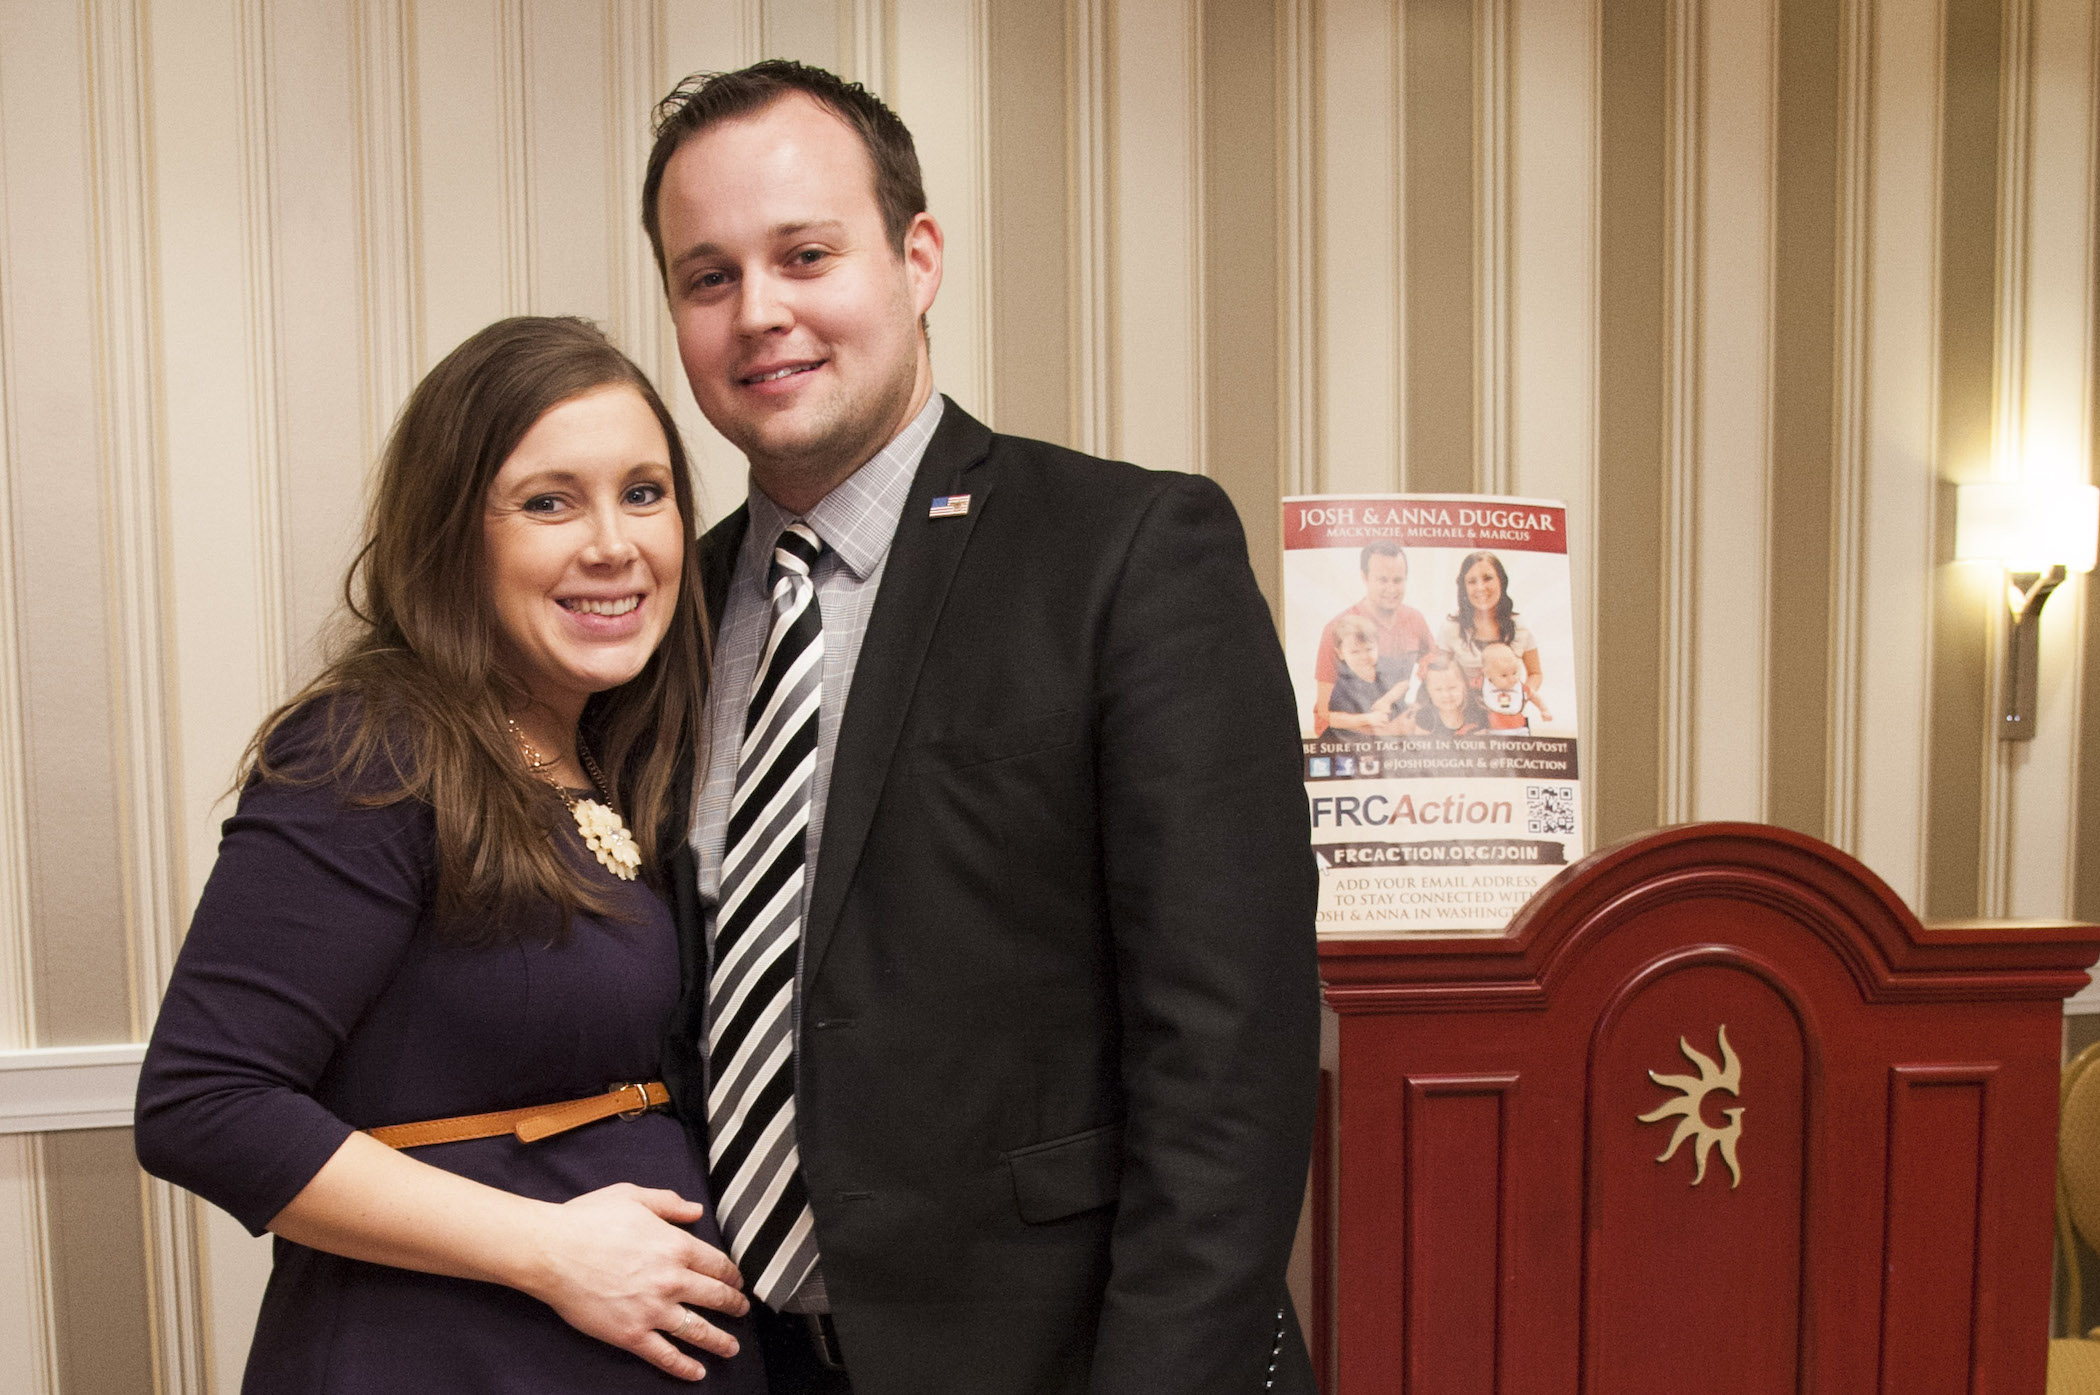 Anna Duggar and Josh Duggar of the Duggar family standing with their arms around each other and smiling at a convention